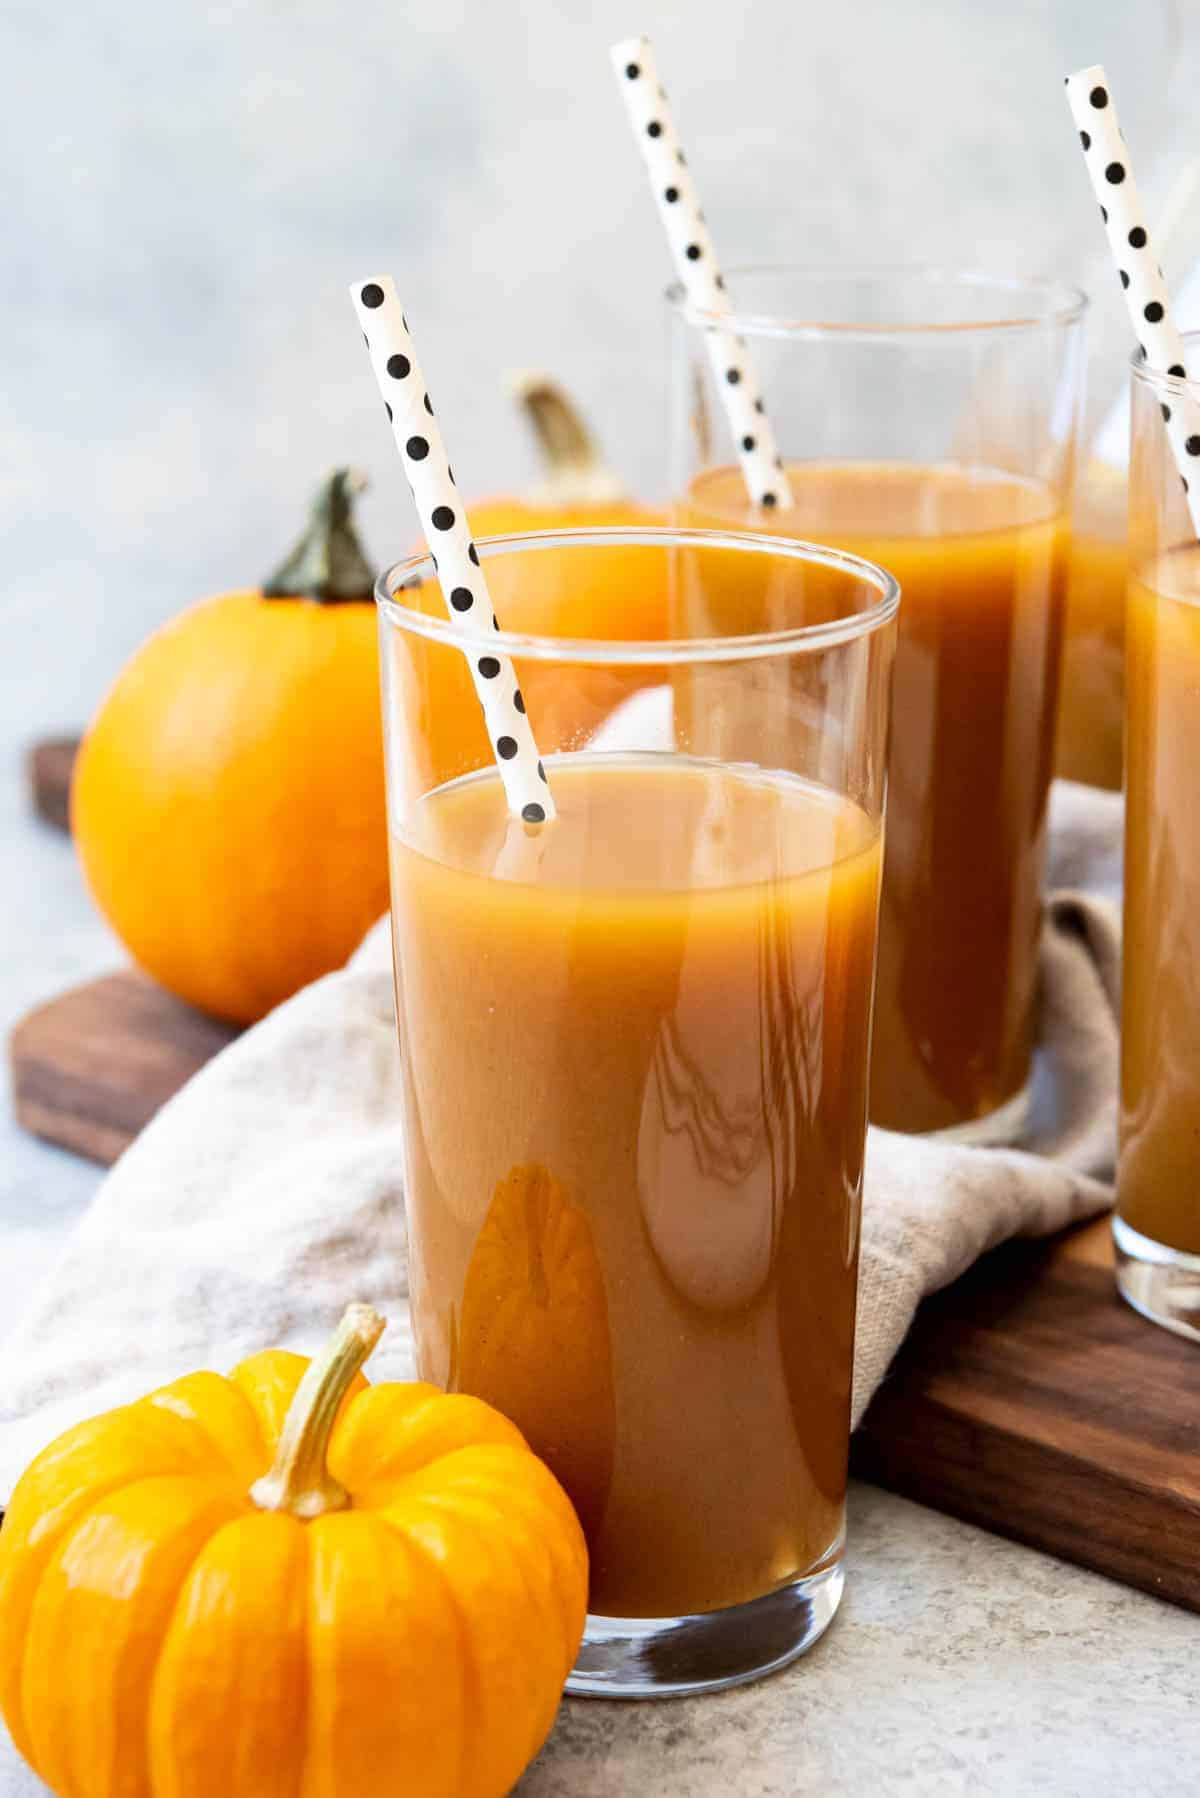 An image of Pumpkin juice in a tall glass with a polka dot straw.